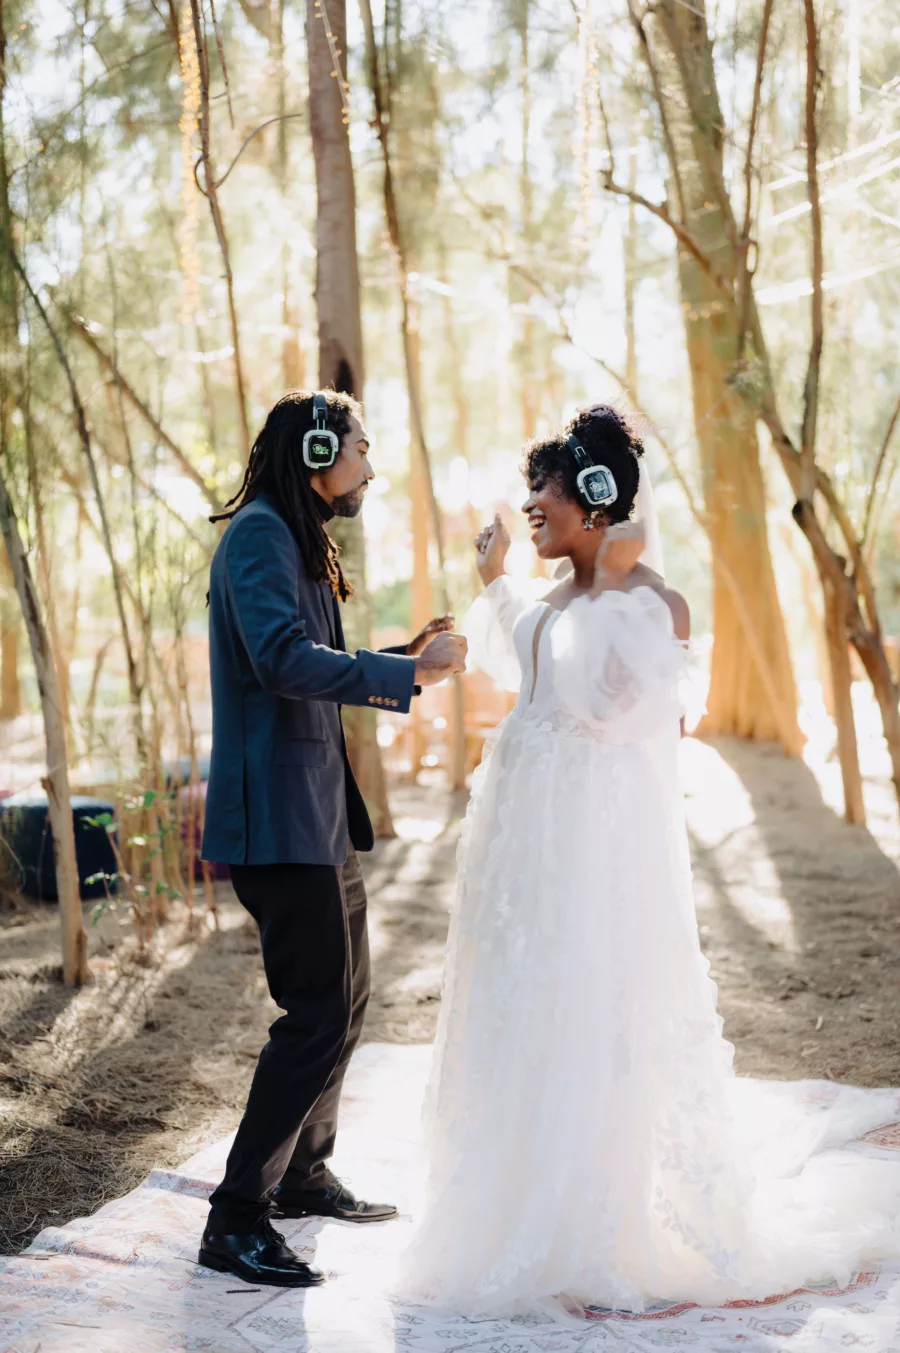 Bride and Groom Wedding Reception Silent Disco Inspiration | Tampa Bay Photographer McNeile Photography | Event Venue Royal Pines Estate | Planner Wilder Mind Events